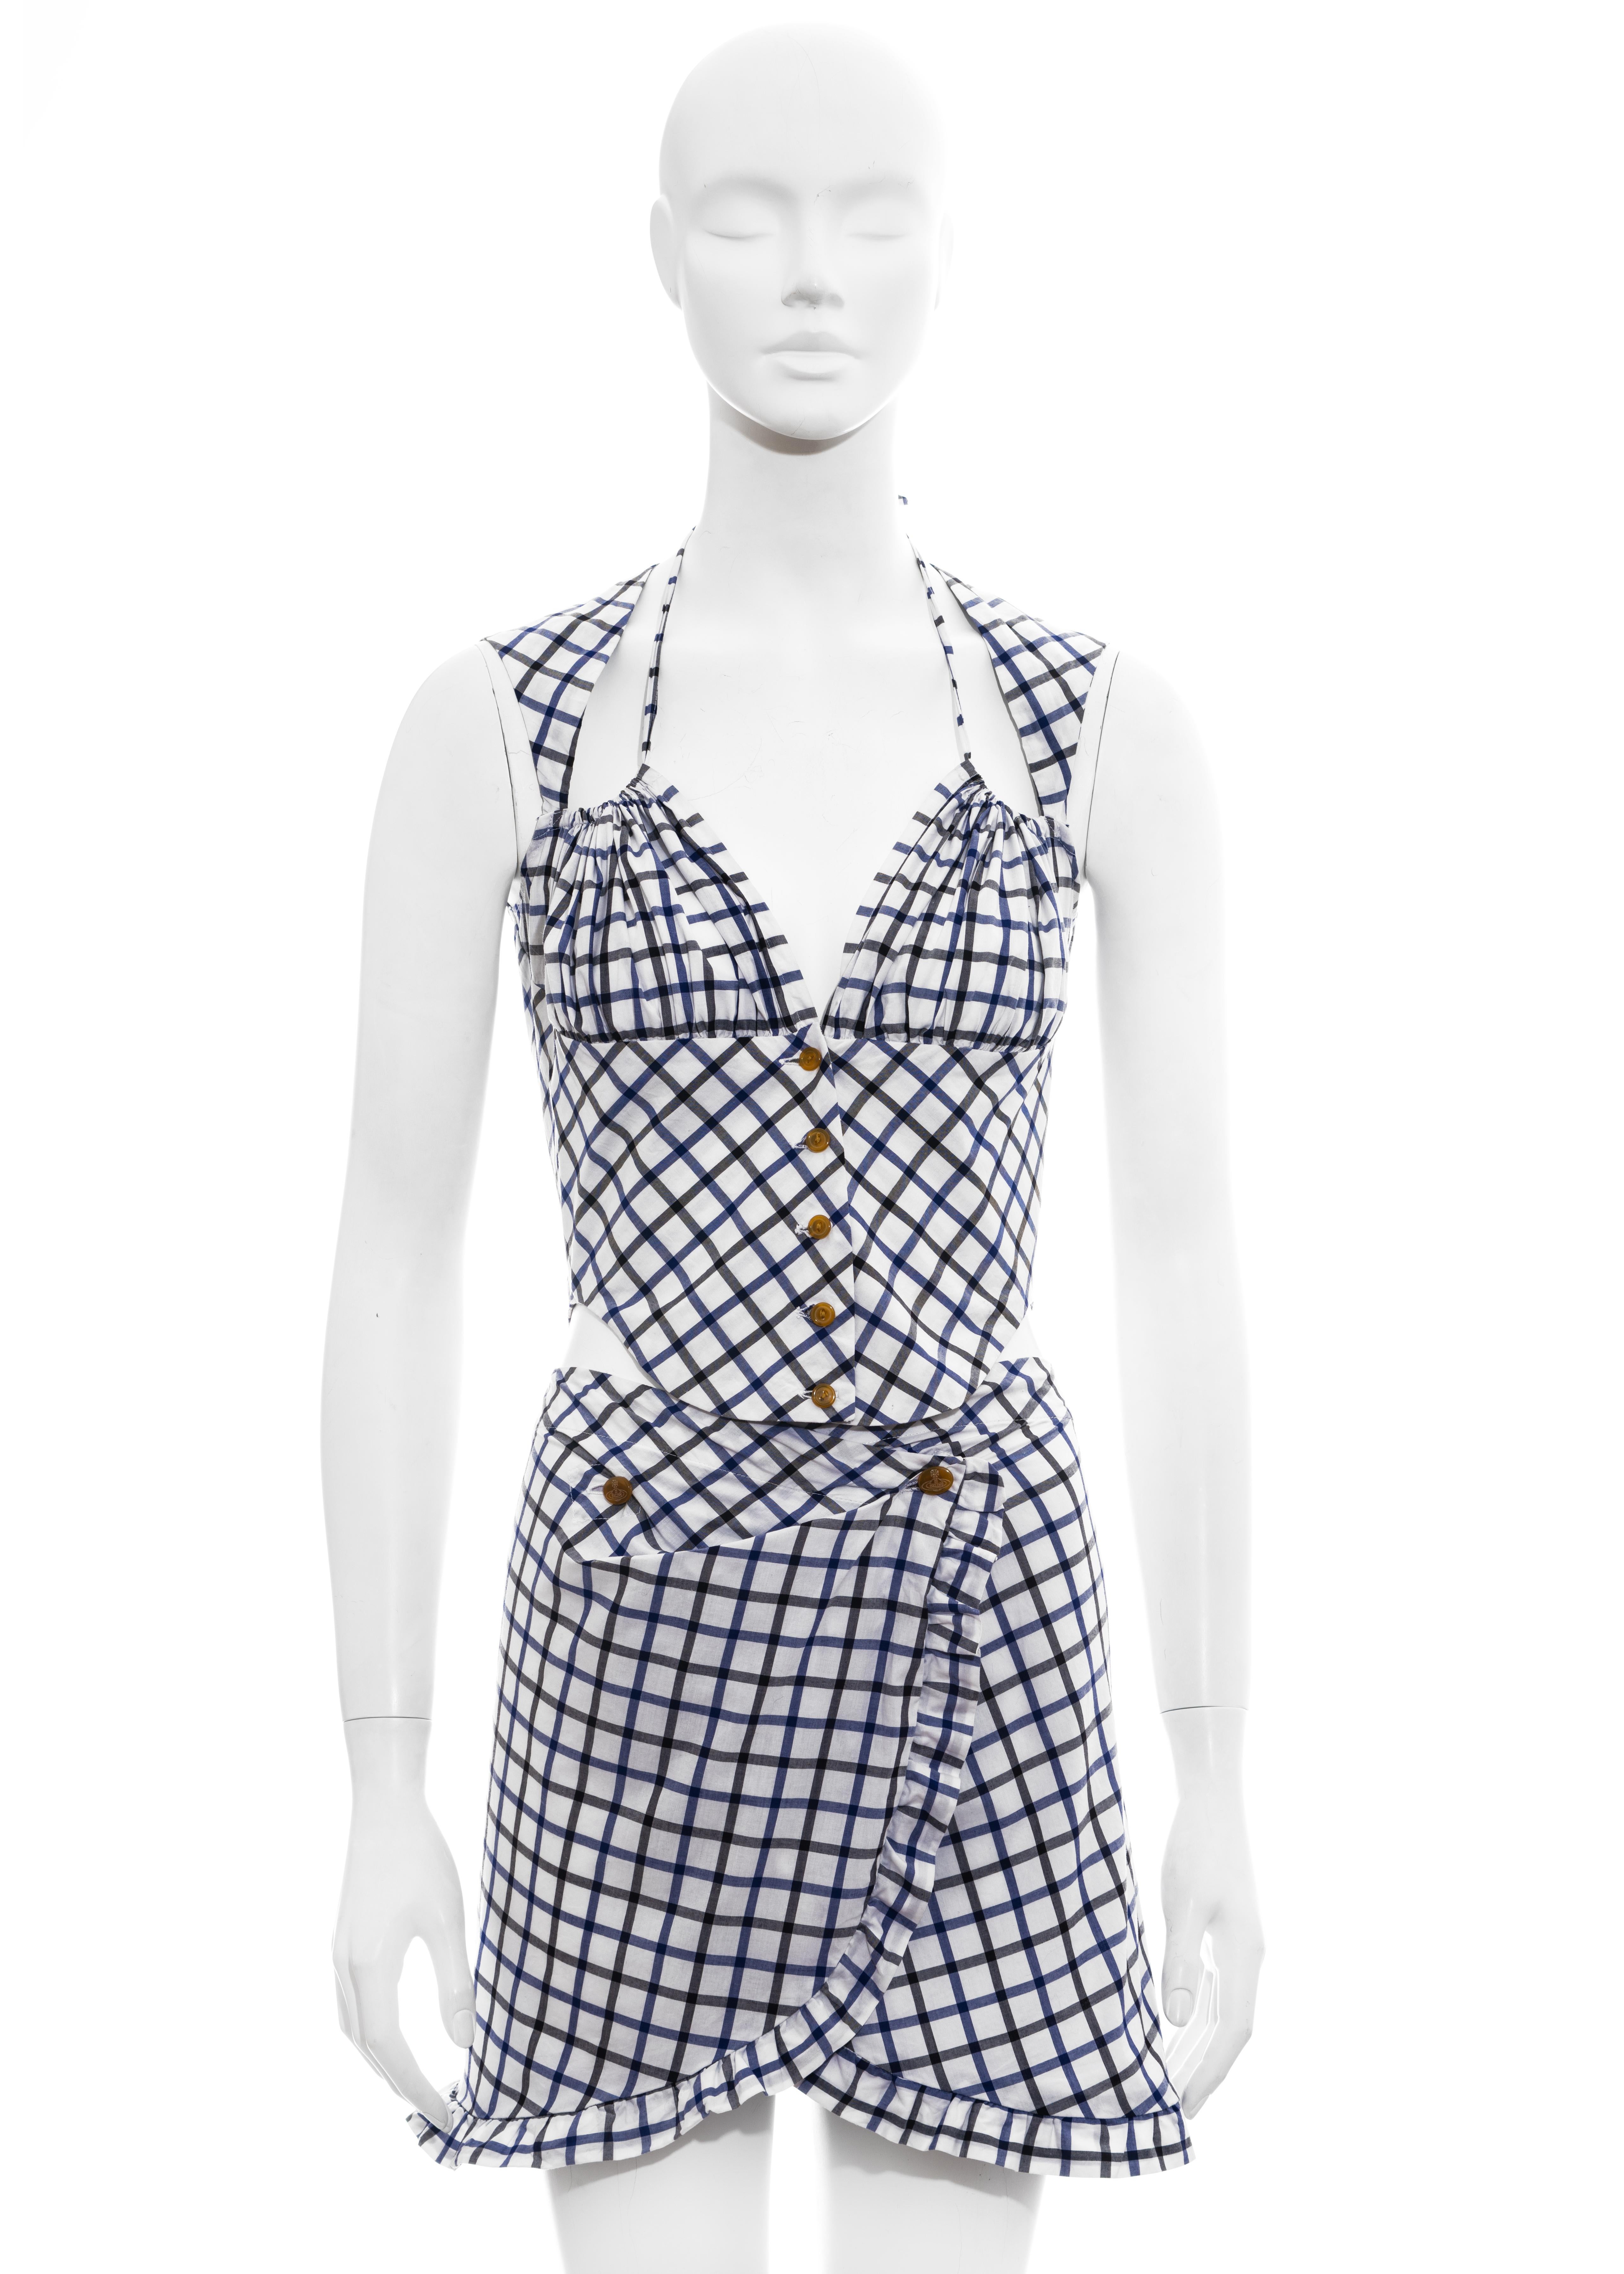 ▪ Vivienne Westwood blue and white checked skirt suit
▪ 100% Cotton
▪ Button-up sleeveless blouse 
▪ Drawstring bra 
▪ Mini wrap skirt with ruffled trim
▪ IT 40 - FR 36 - UK 8 - US 4
▪ Spring-Summer 1994